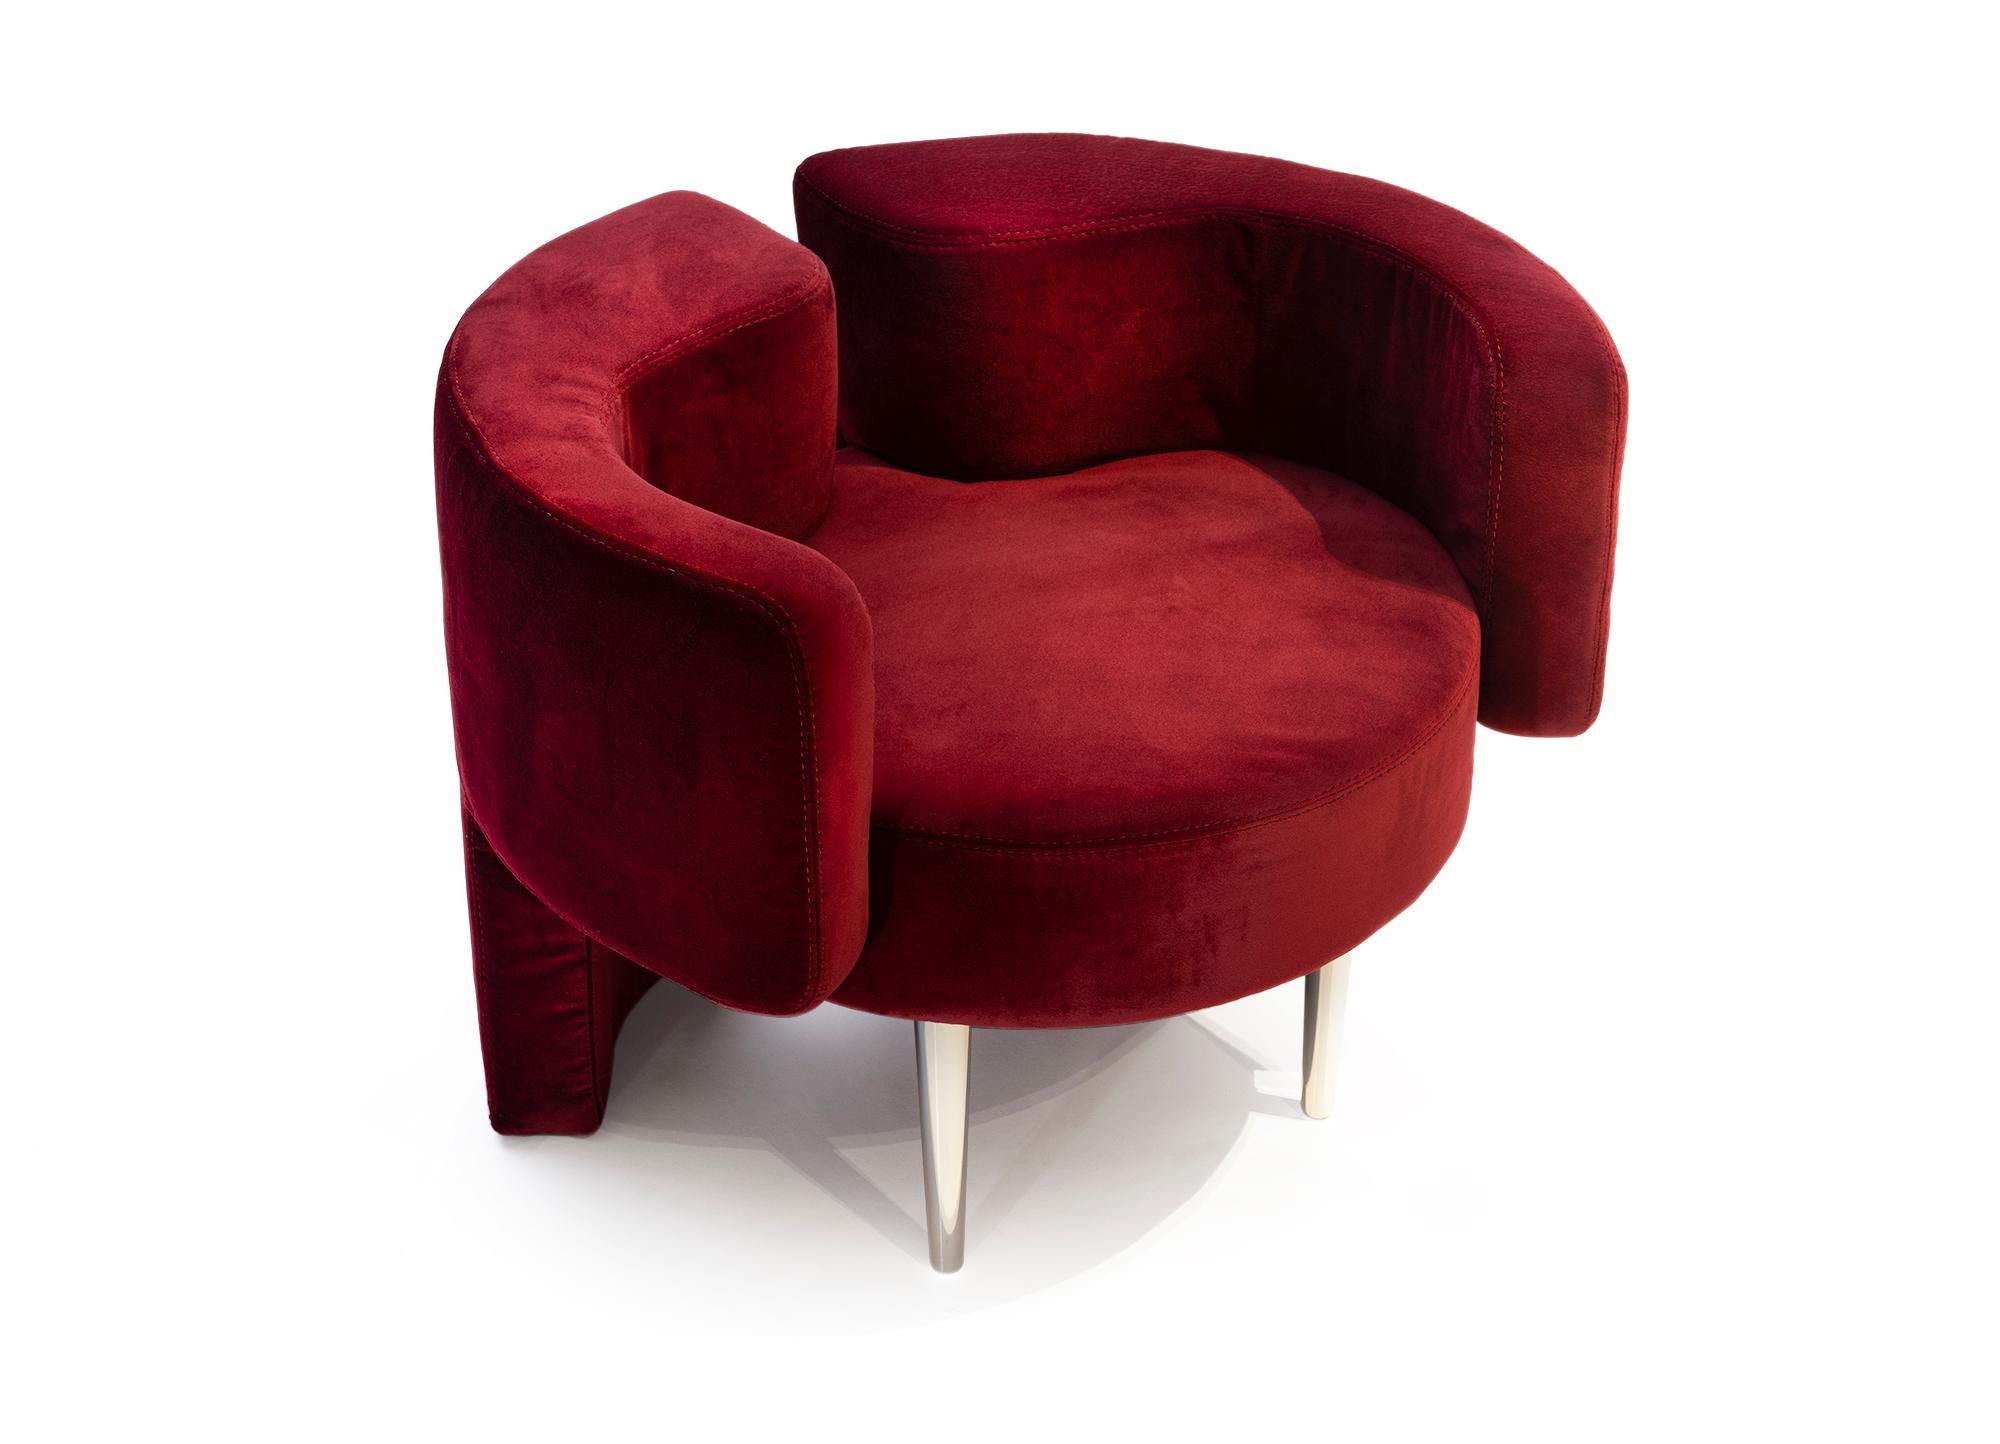 MR Armchair - 21st century contemporary red velvet and solid aluminum legs circular armchair

A soothing, intimate feeling of comfort and placidity in tandem with strong presence underlie the concept of MR armchair. 
Symmetrical velvet “wings”